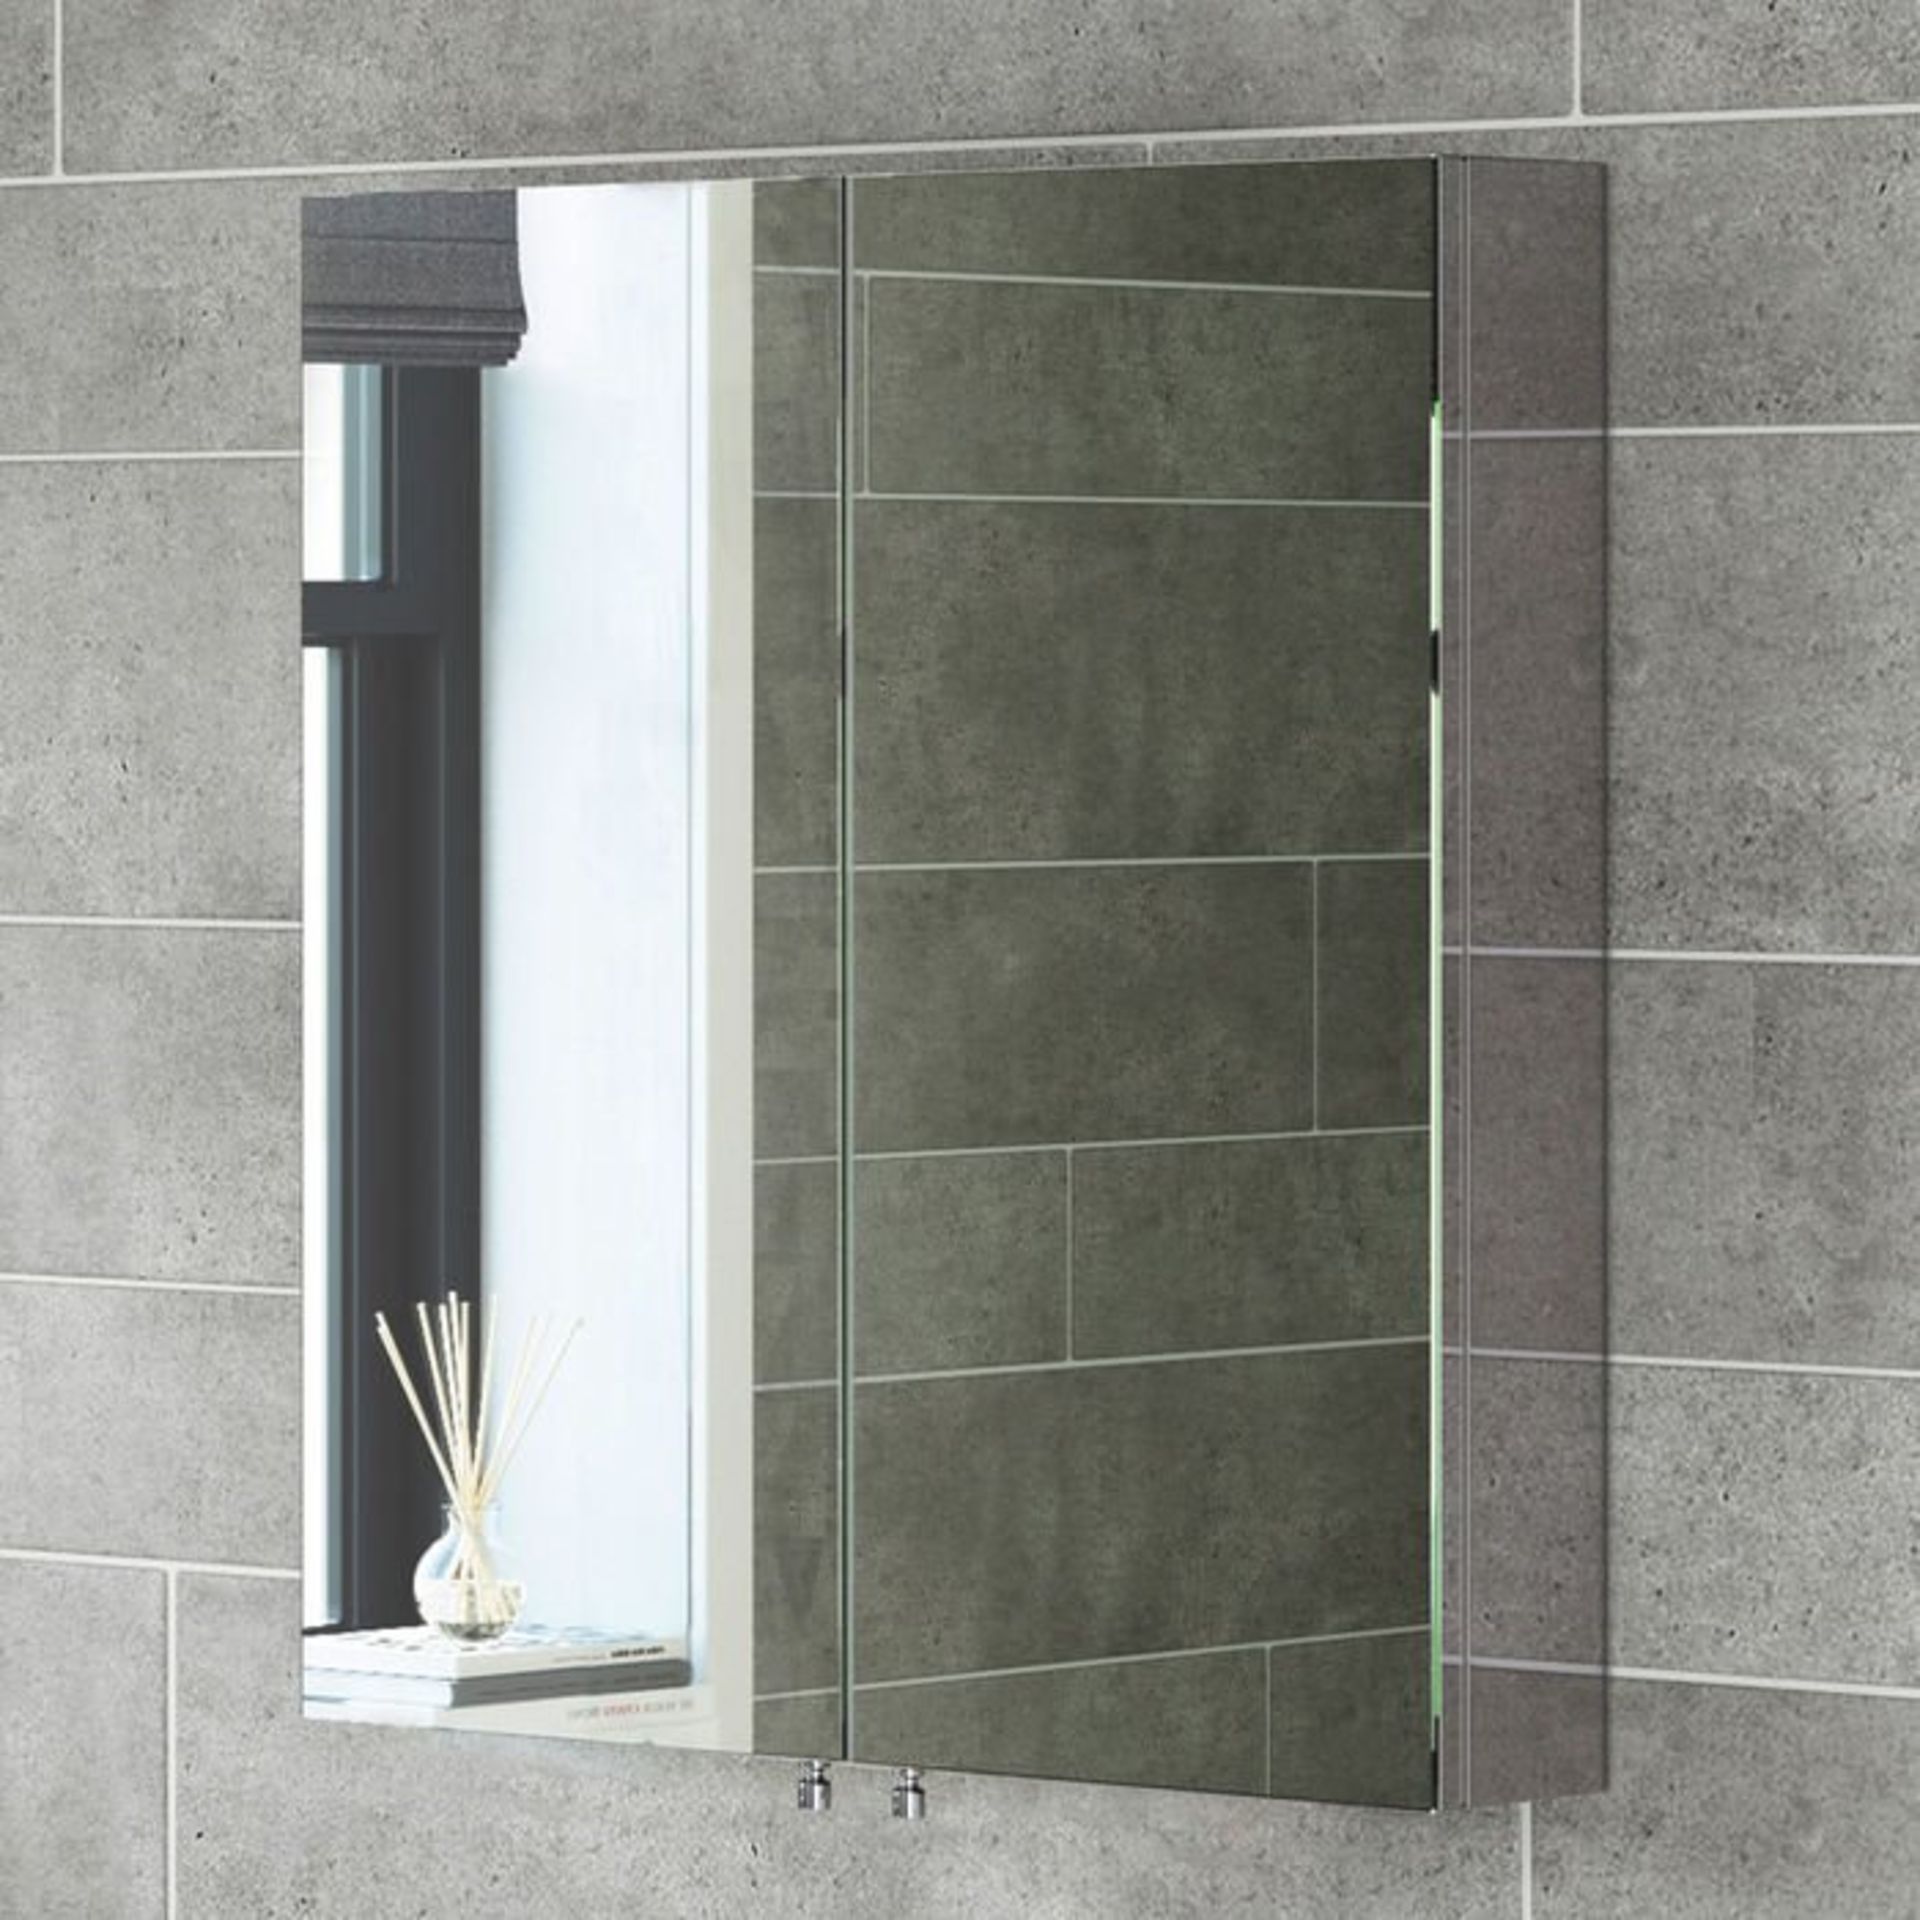 (L120) 670x600mm Liberty Stainless Steel Double Door Mirror Cabinet. RRP £262.99. Made from high-